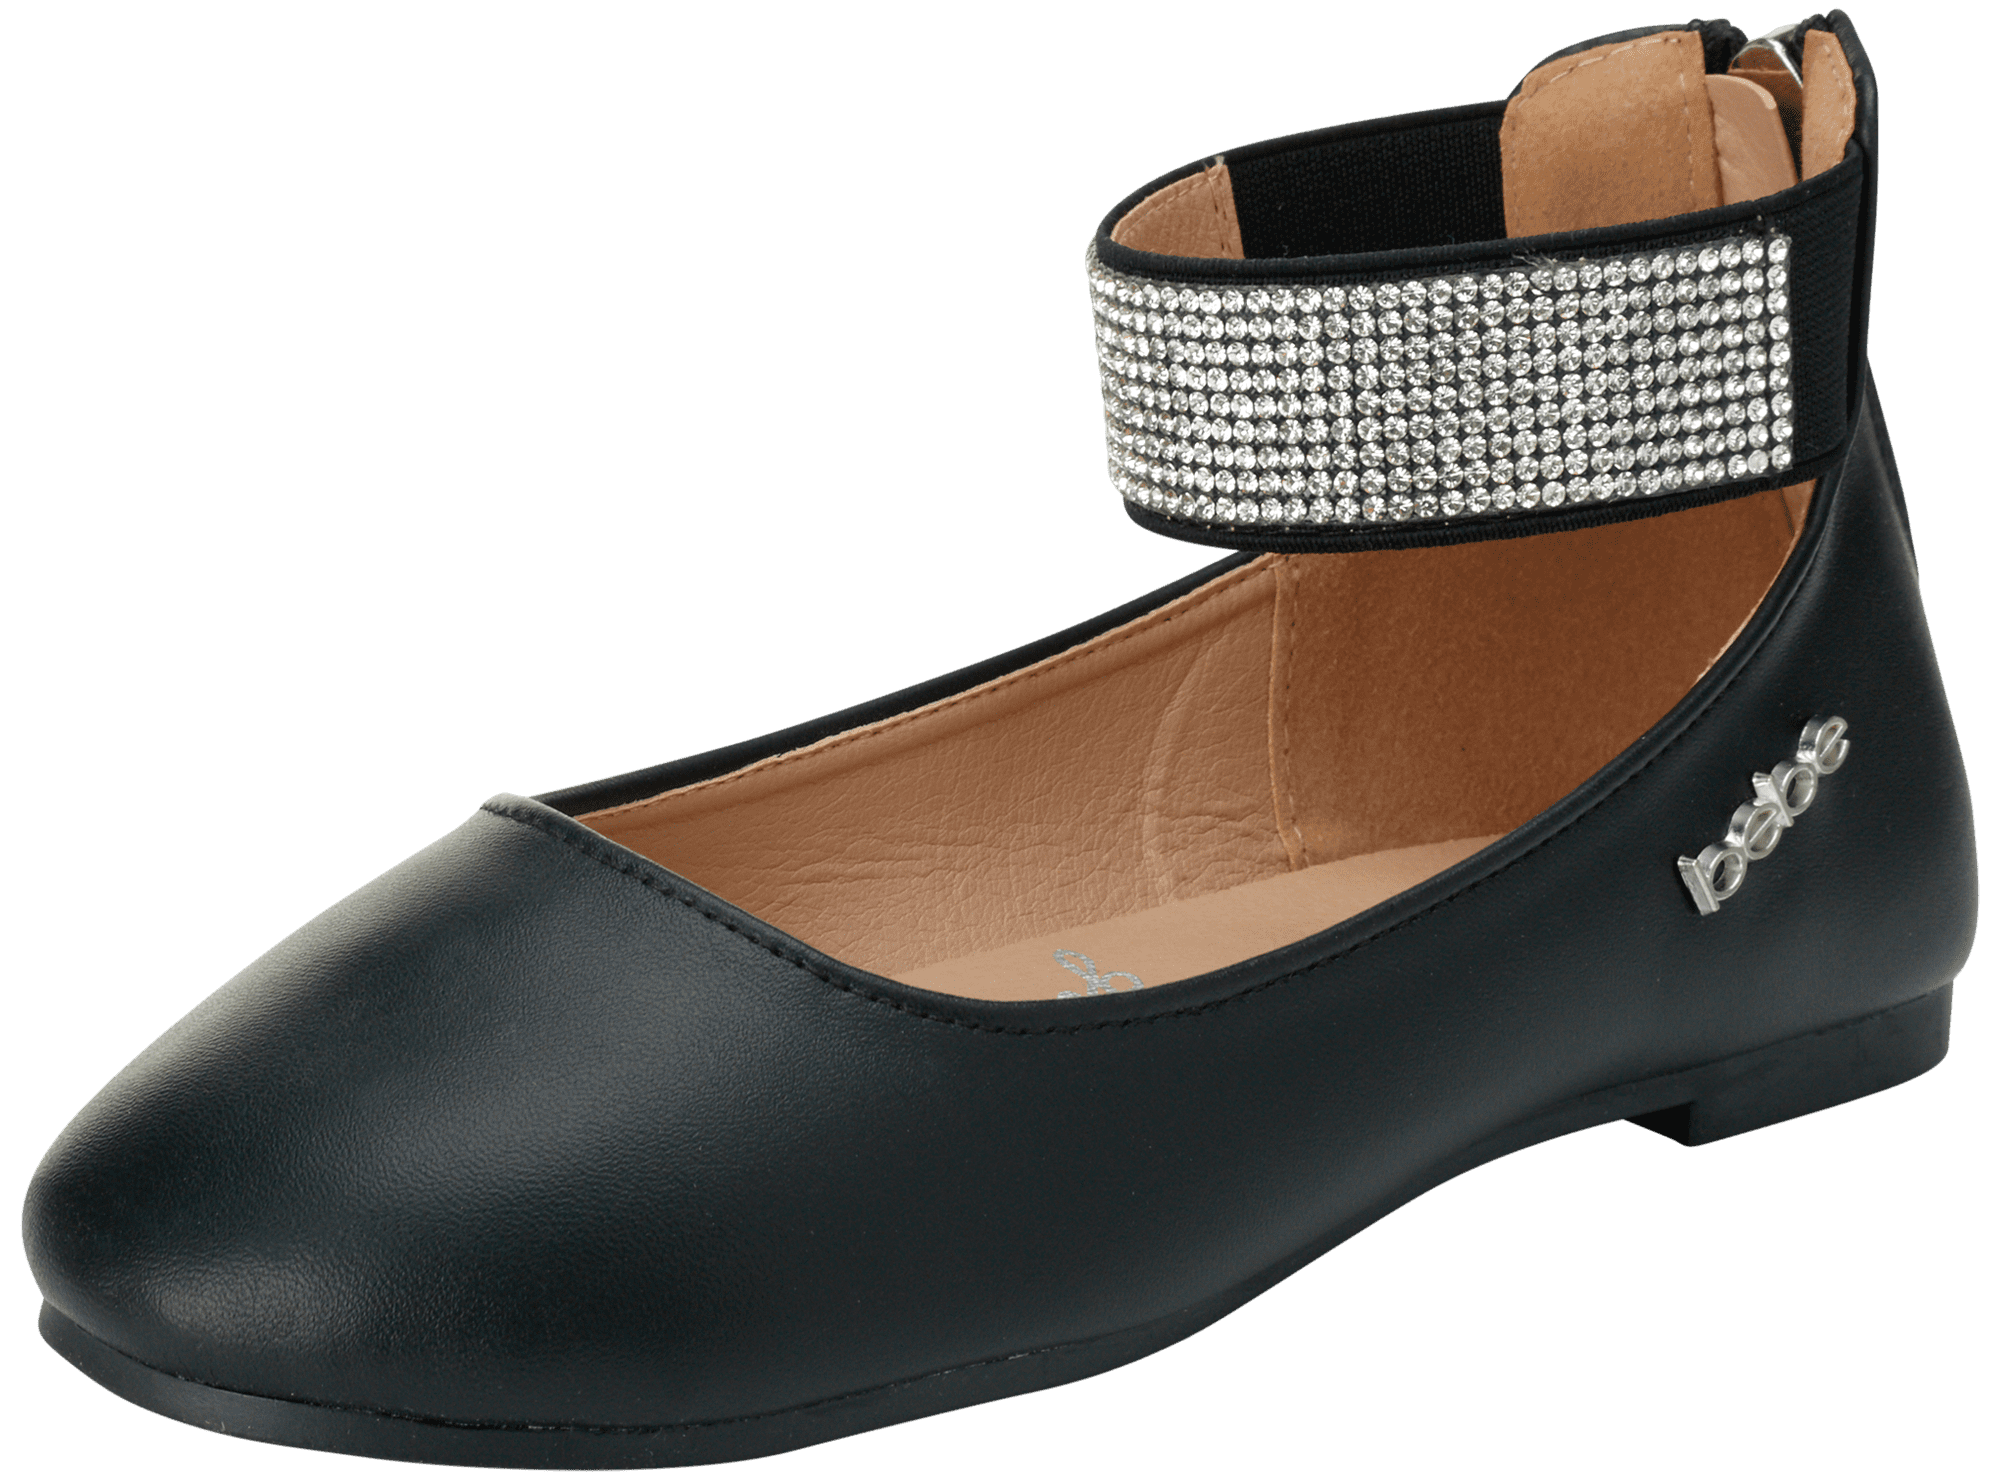 bebe Girls' Shoes - Ballet Flats with Rhinestone Studded Ankle Straps ...